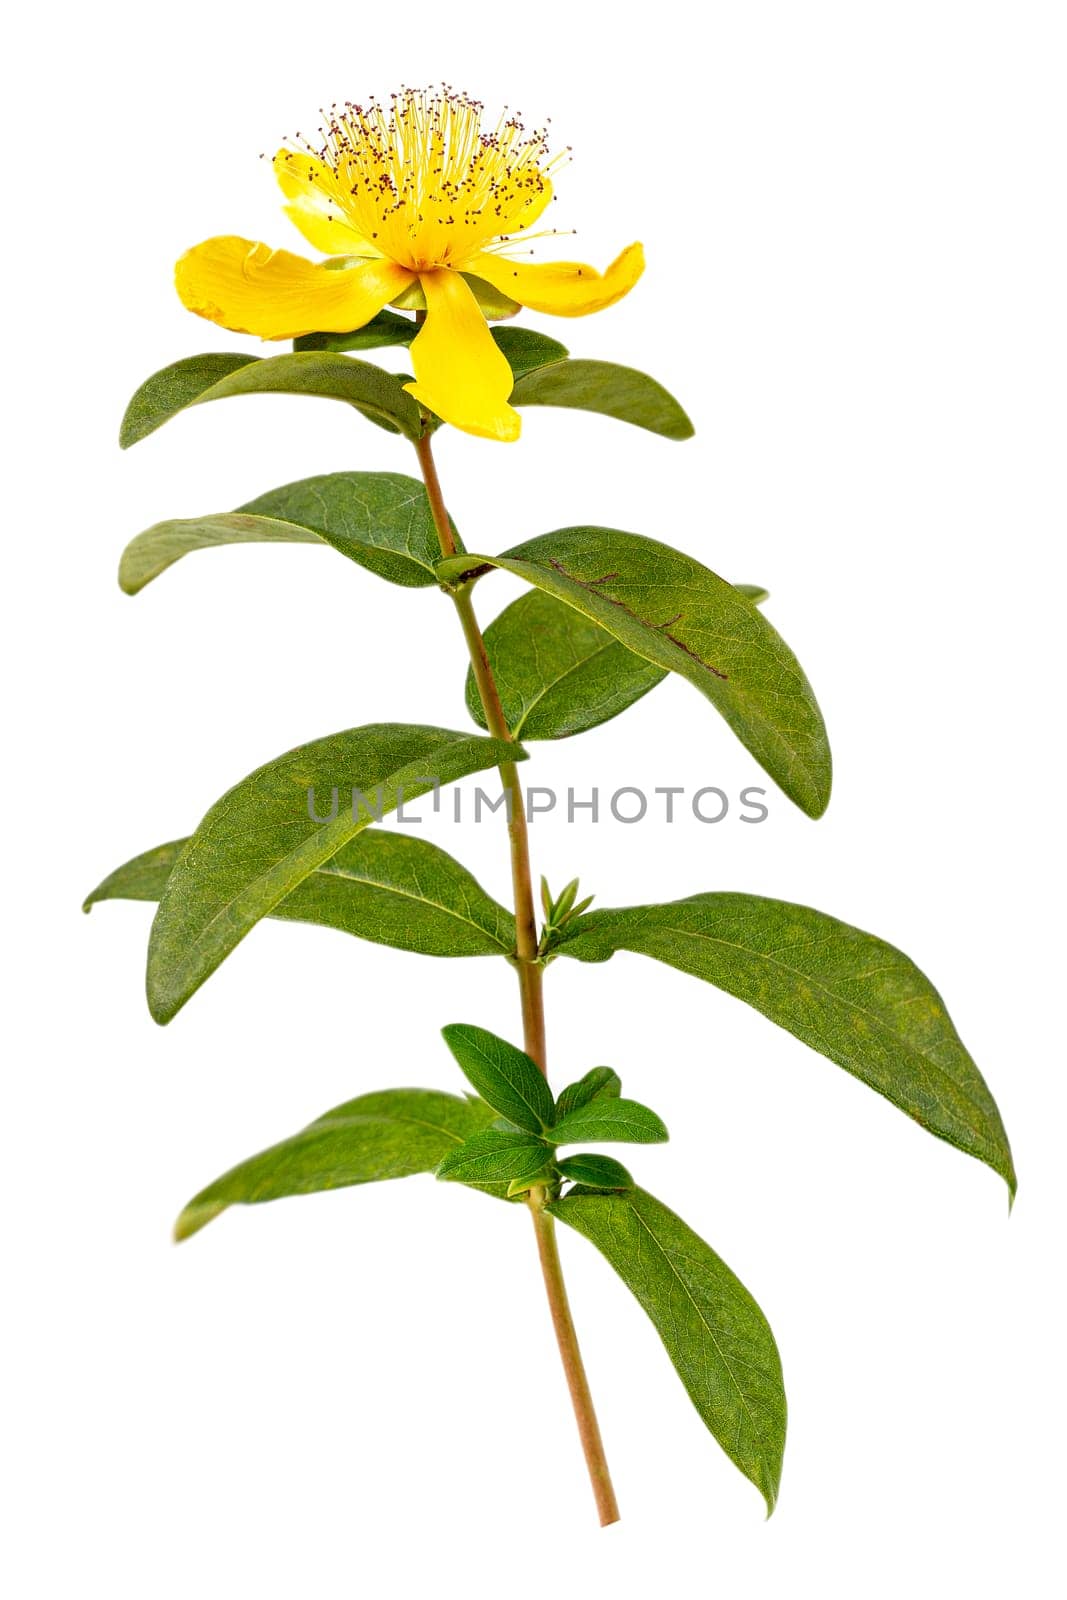 Perforate St John's-Wort Flowers Isolated on White Background. yellow flowers by JPC-PROD